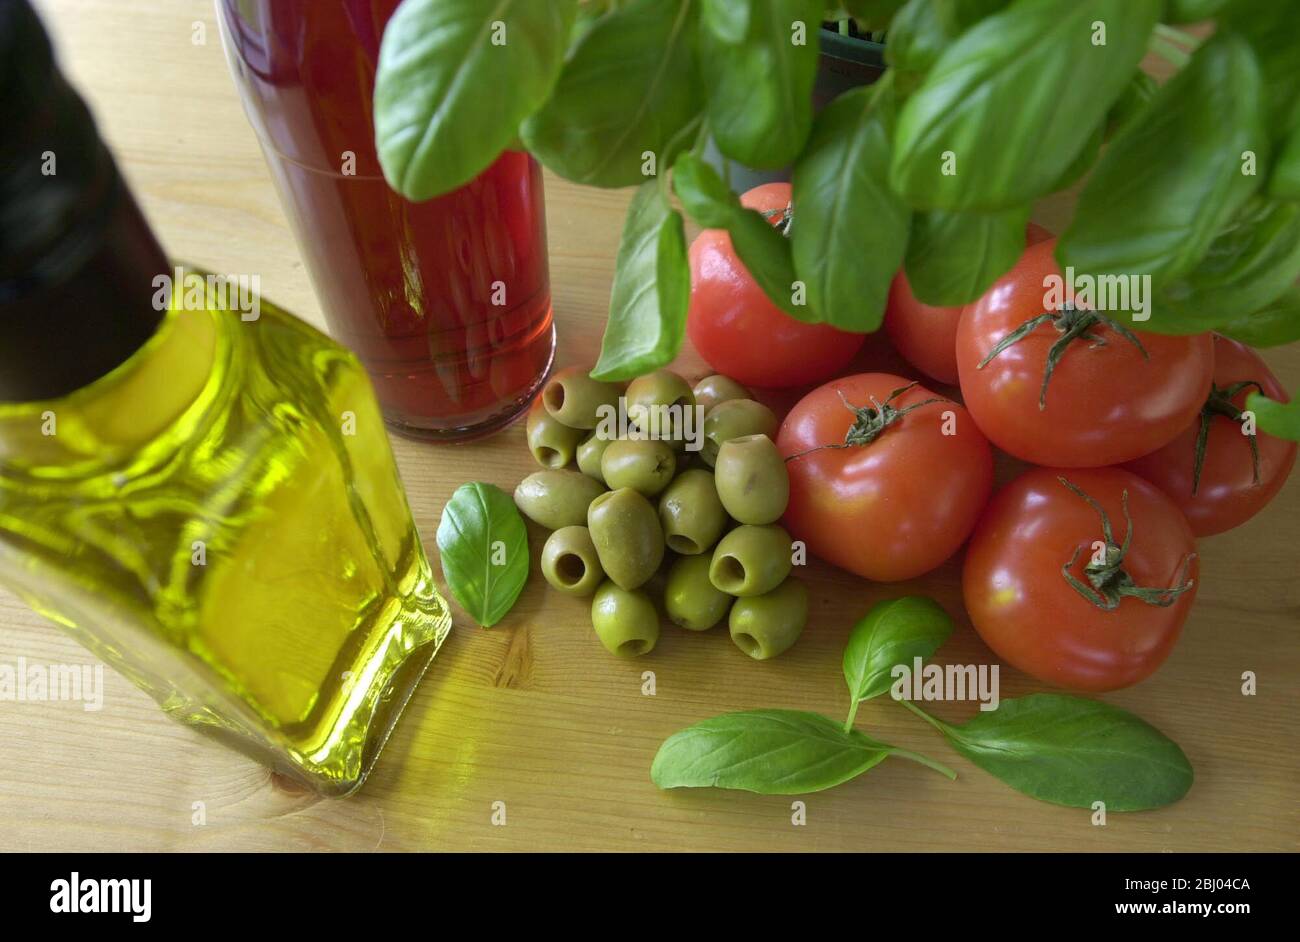 TOMATO AND OLIVE DIP WITH OLIVE OIL, RED WINE VINEGAR AND BASIL LEAVES. Stock Photo